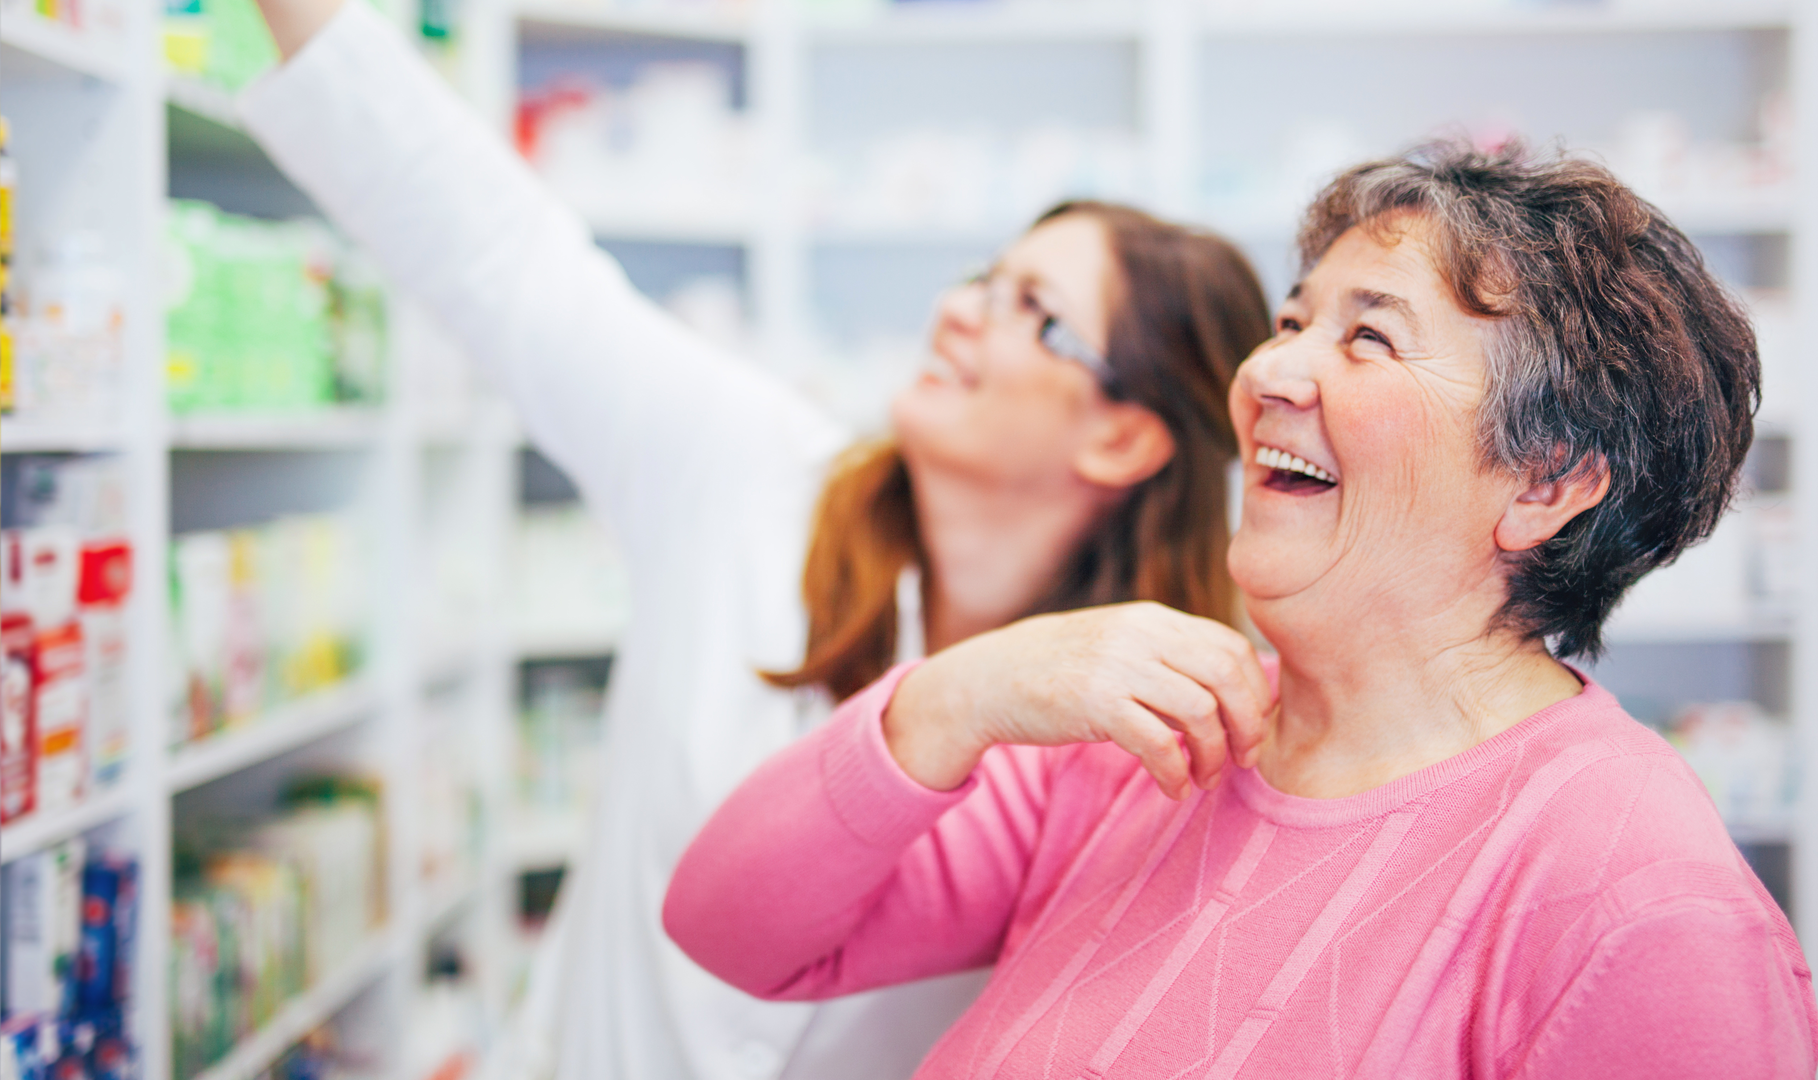 A customer laughing joyfully as a pharmacist helps her find the medication she needs